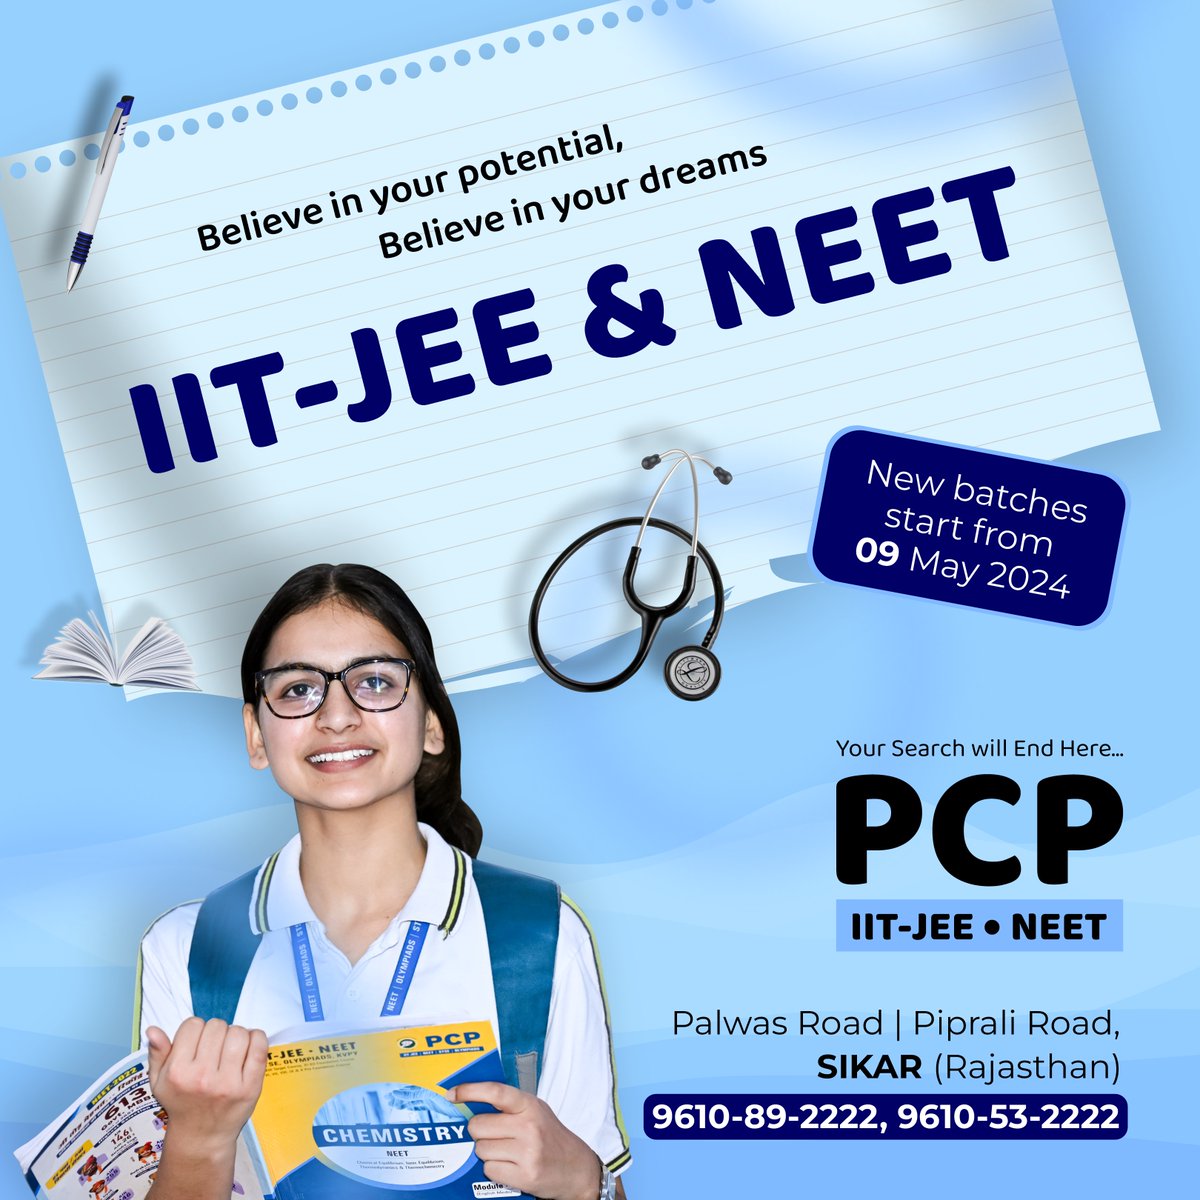 Believe in your potential, believe in your dreams!
PCP Sikar is the number 1 choice for IIT-JEE and NEET Success📷

#neet2024 #iitjee #JEEAdvanced2024 #jeeadvanced #pcpsikar #iitjee2024 #NEET #EducationOpportunities #EnrollNow #AdmissionsOpen #QualityEducation